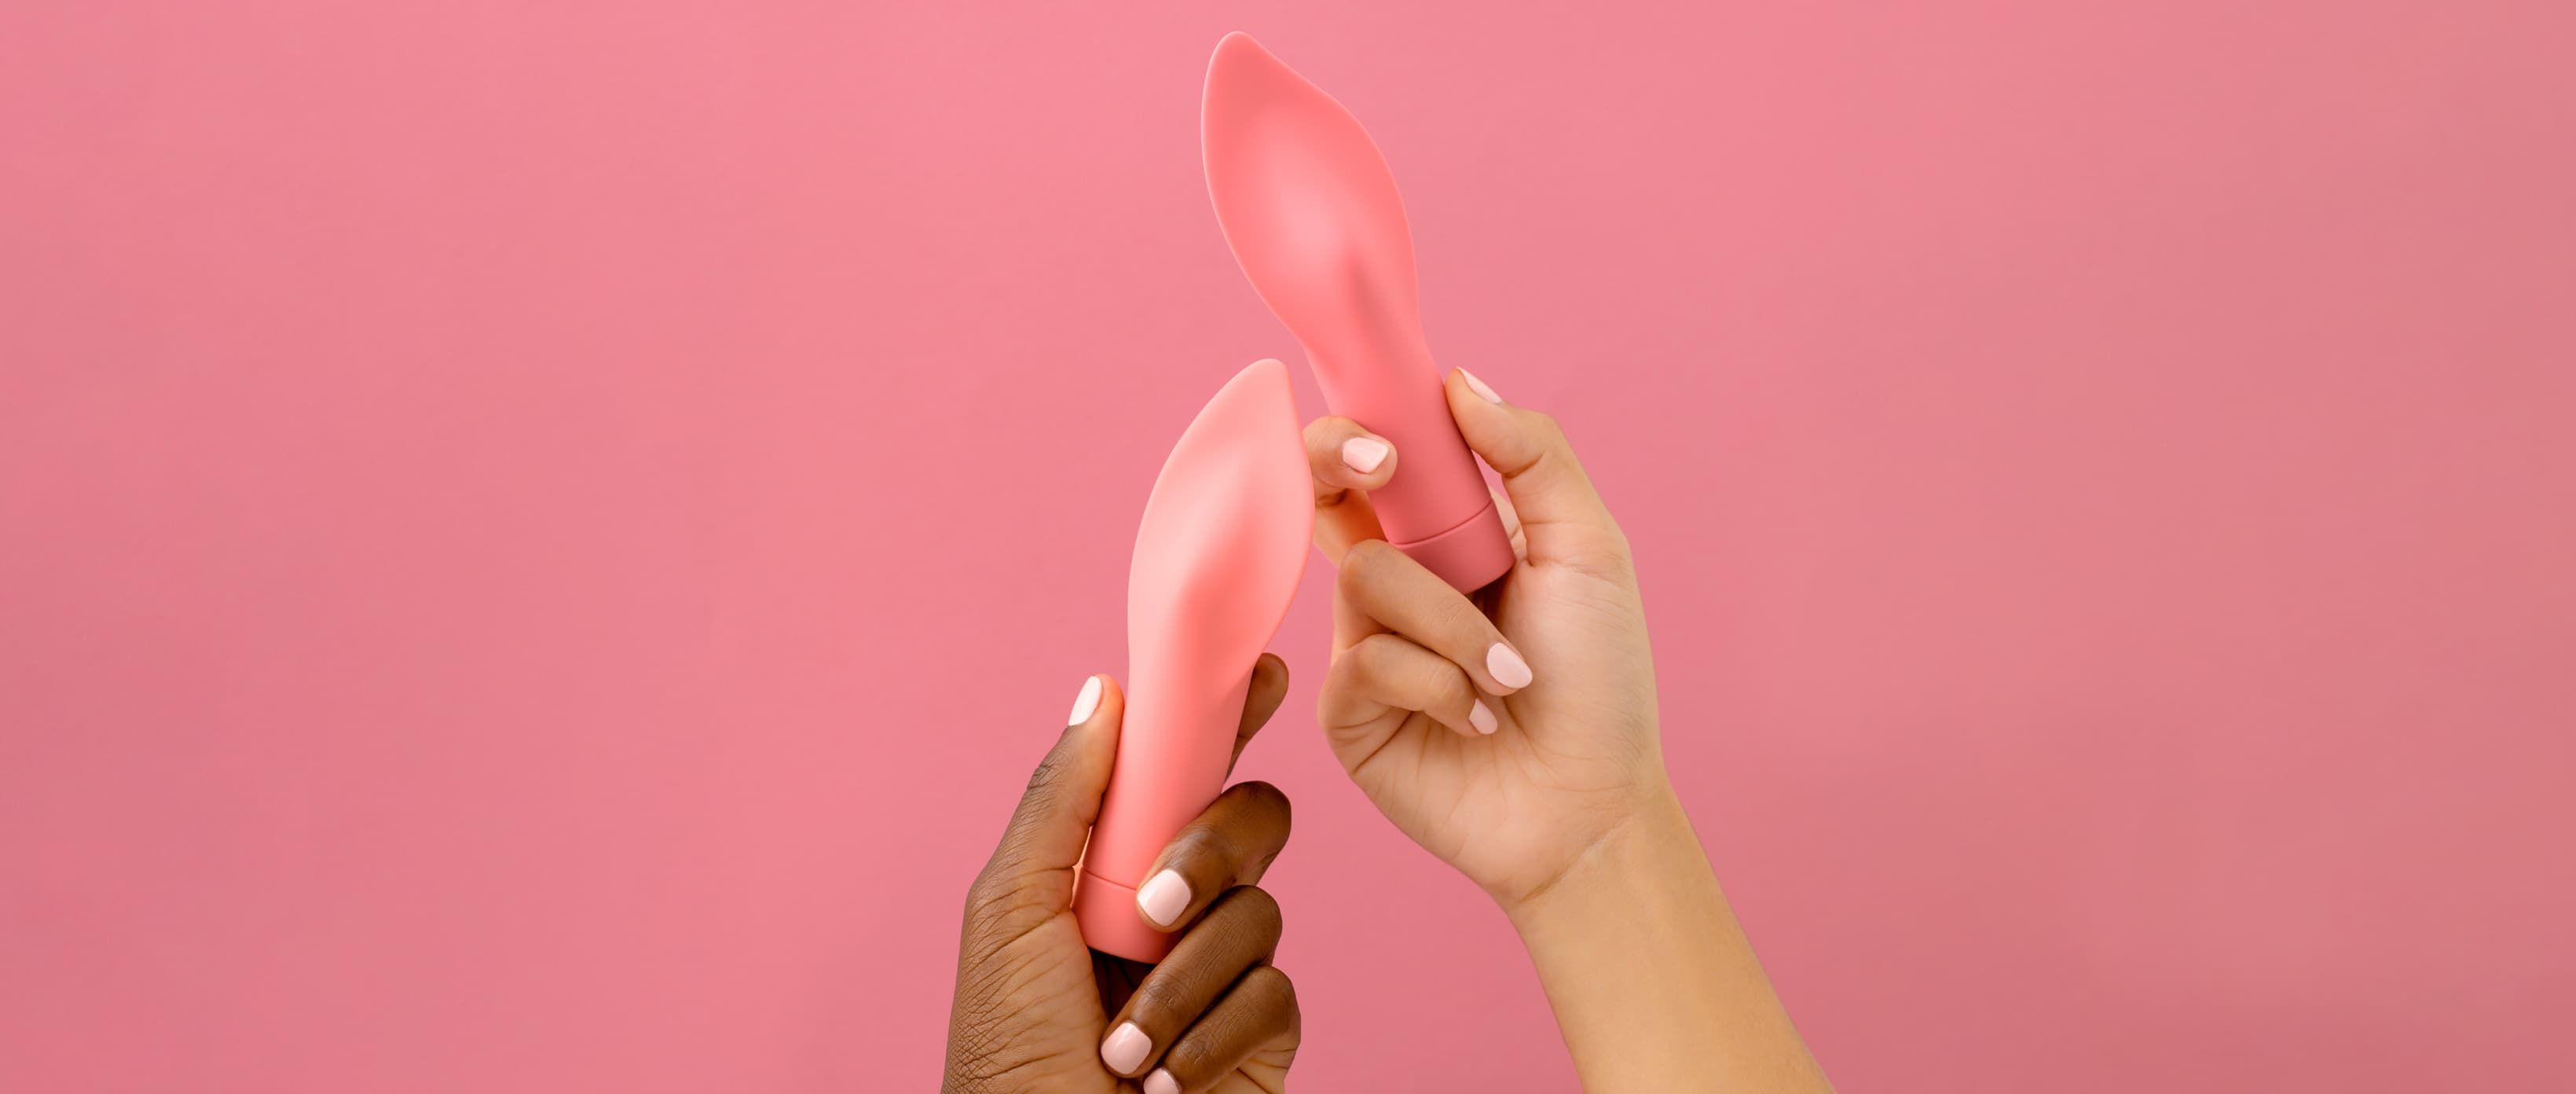 Models hold smilemakers vibrators against colourful backgrounds.